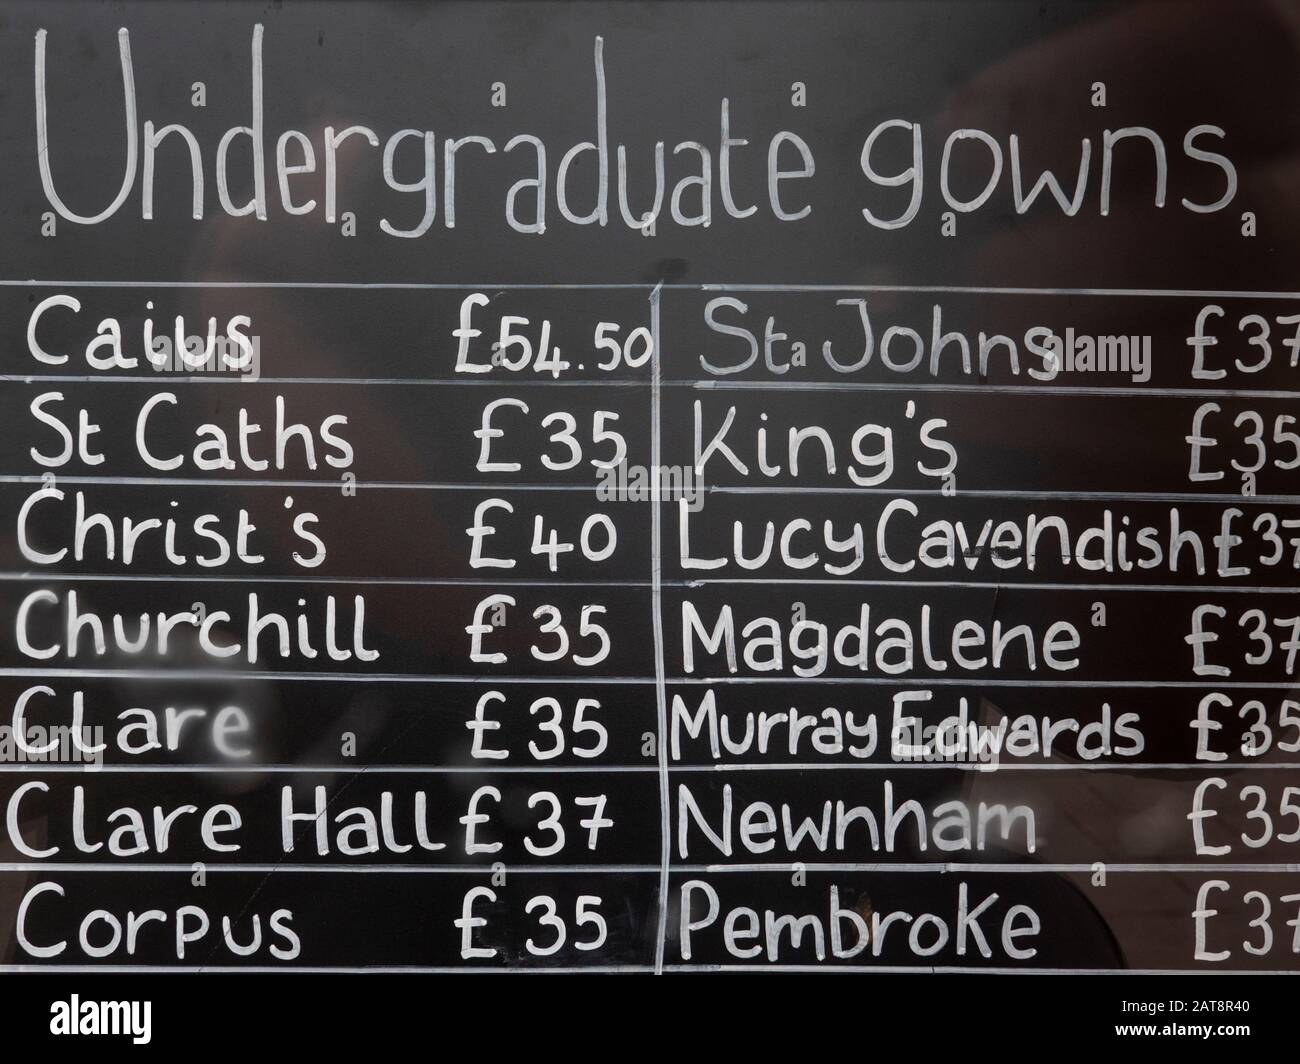 A list of prices for undergraduate gowns for various colleges at Cambridge University in the shop window at Ryder and Amies a university clothes suppl Stock Photo